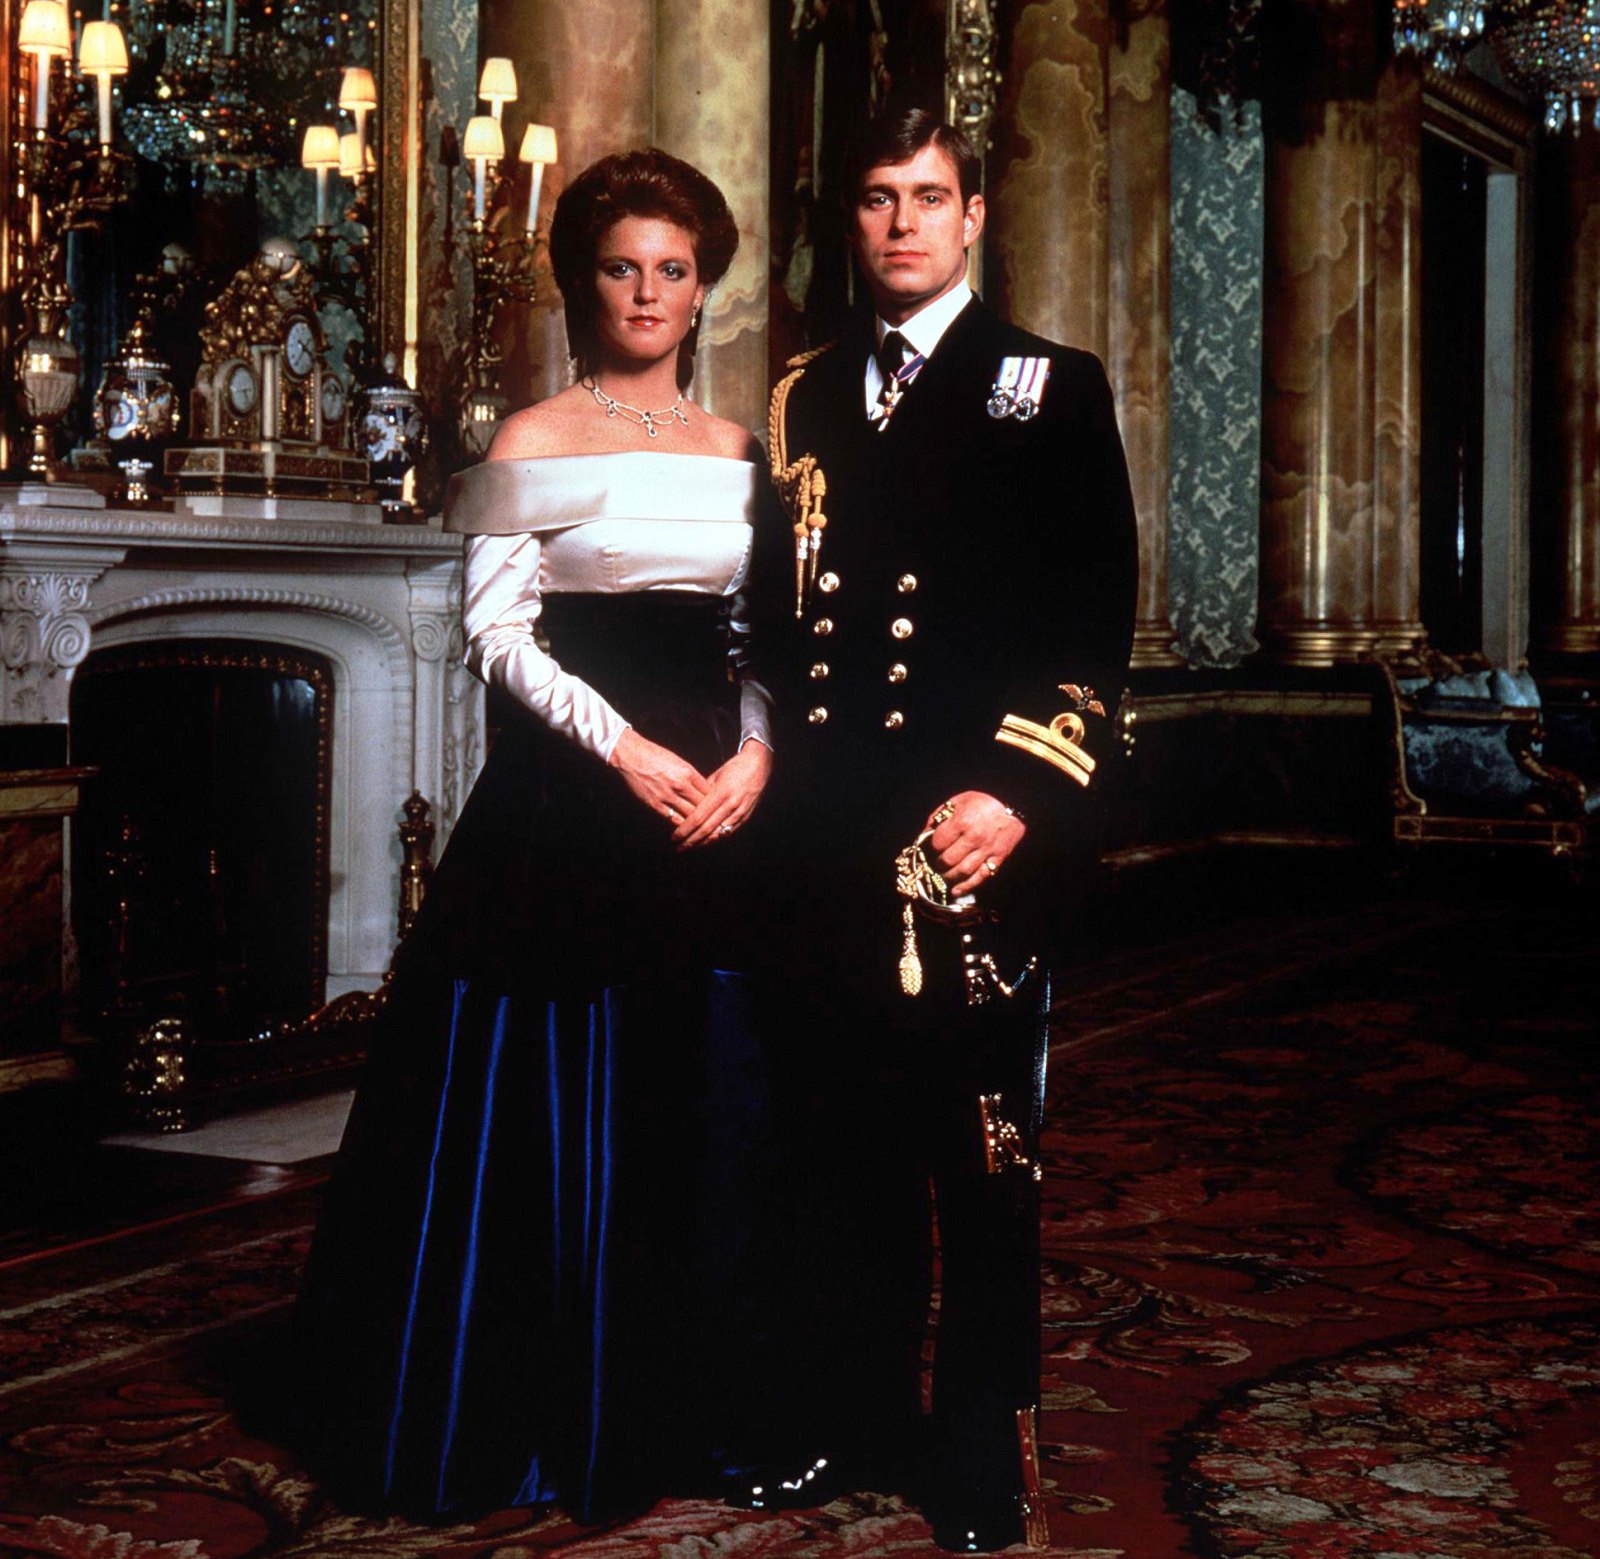 Prince Andrew and Sarah Ferguson: The Way They Were